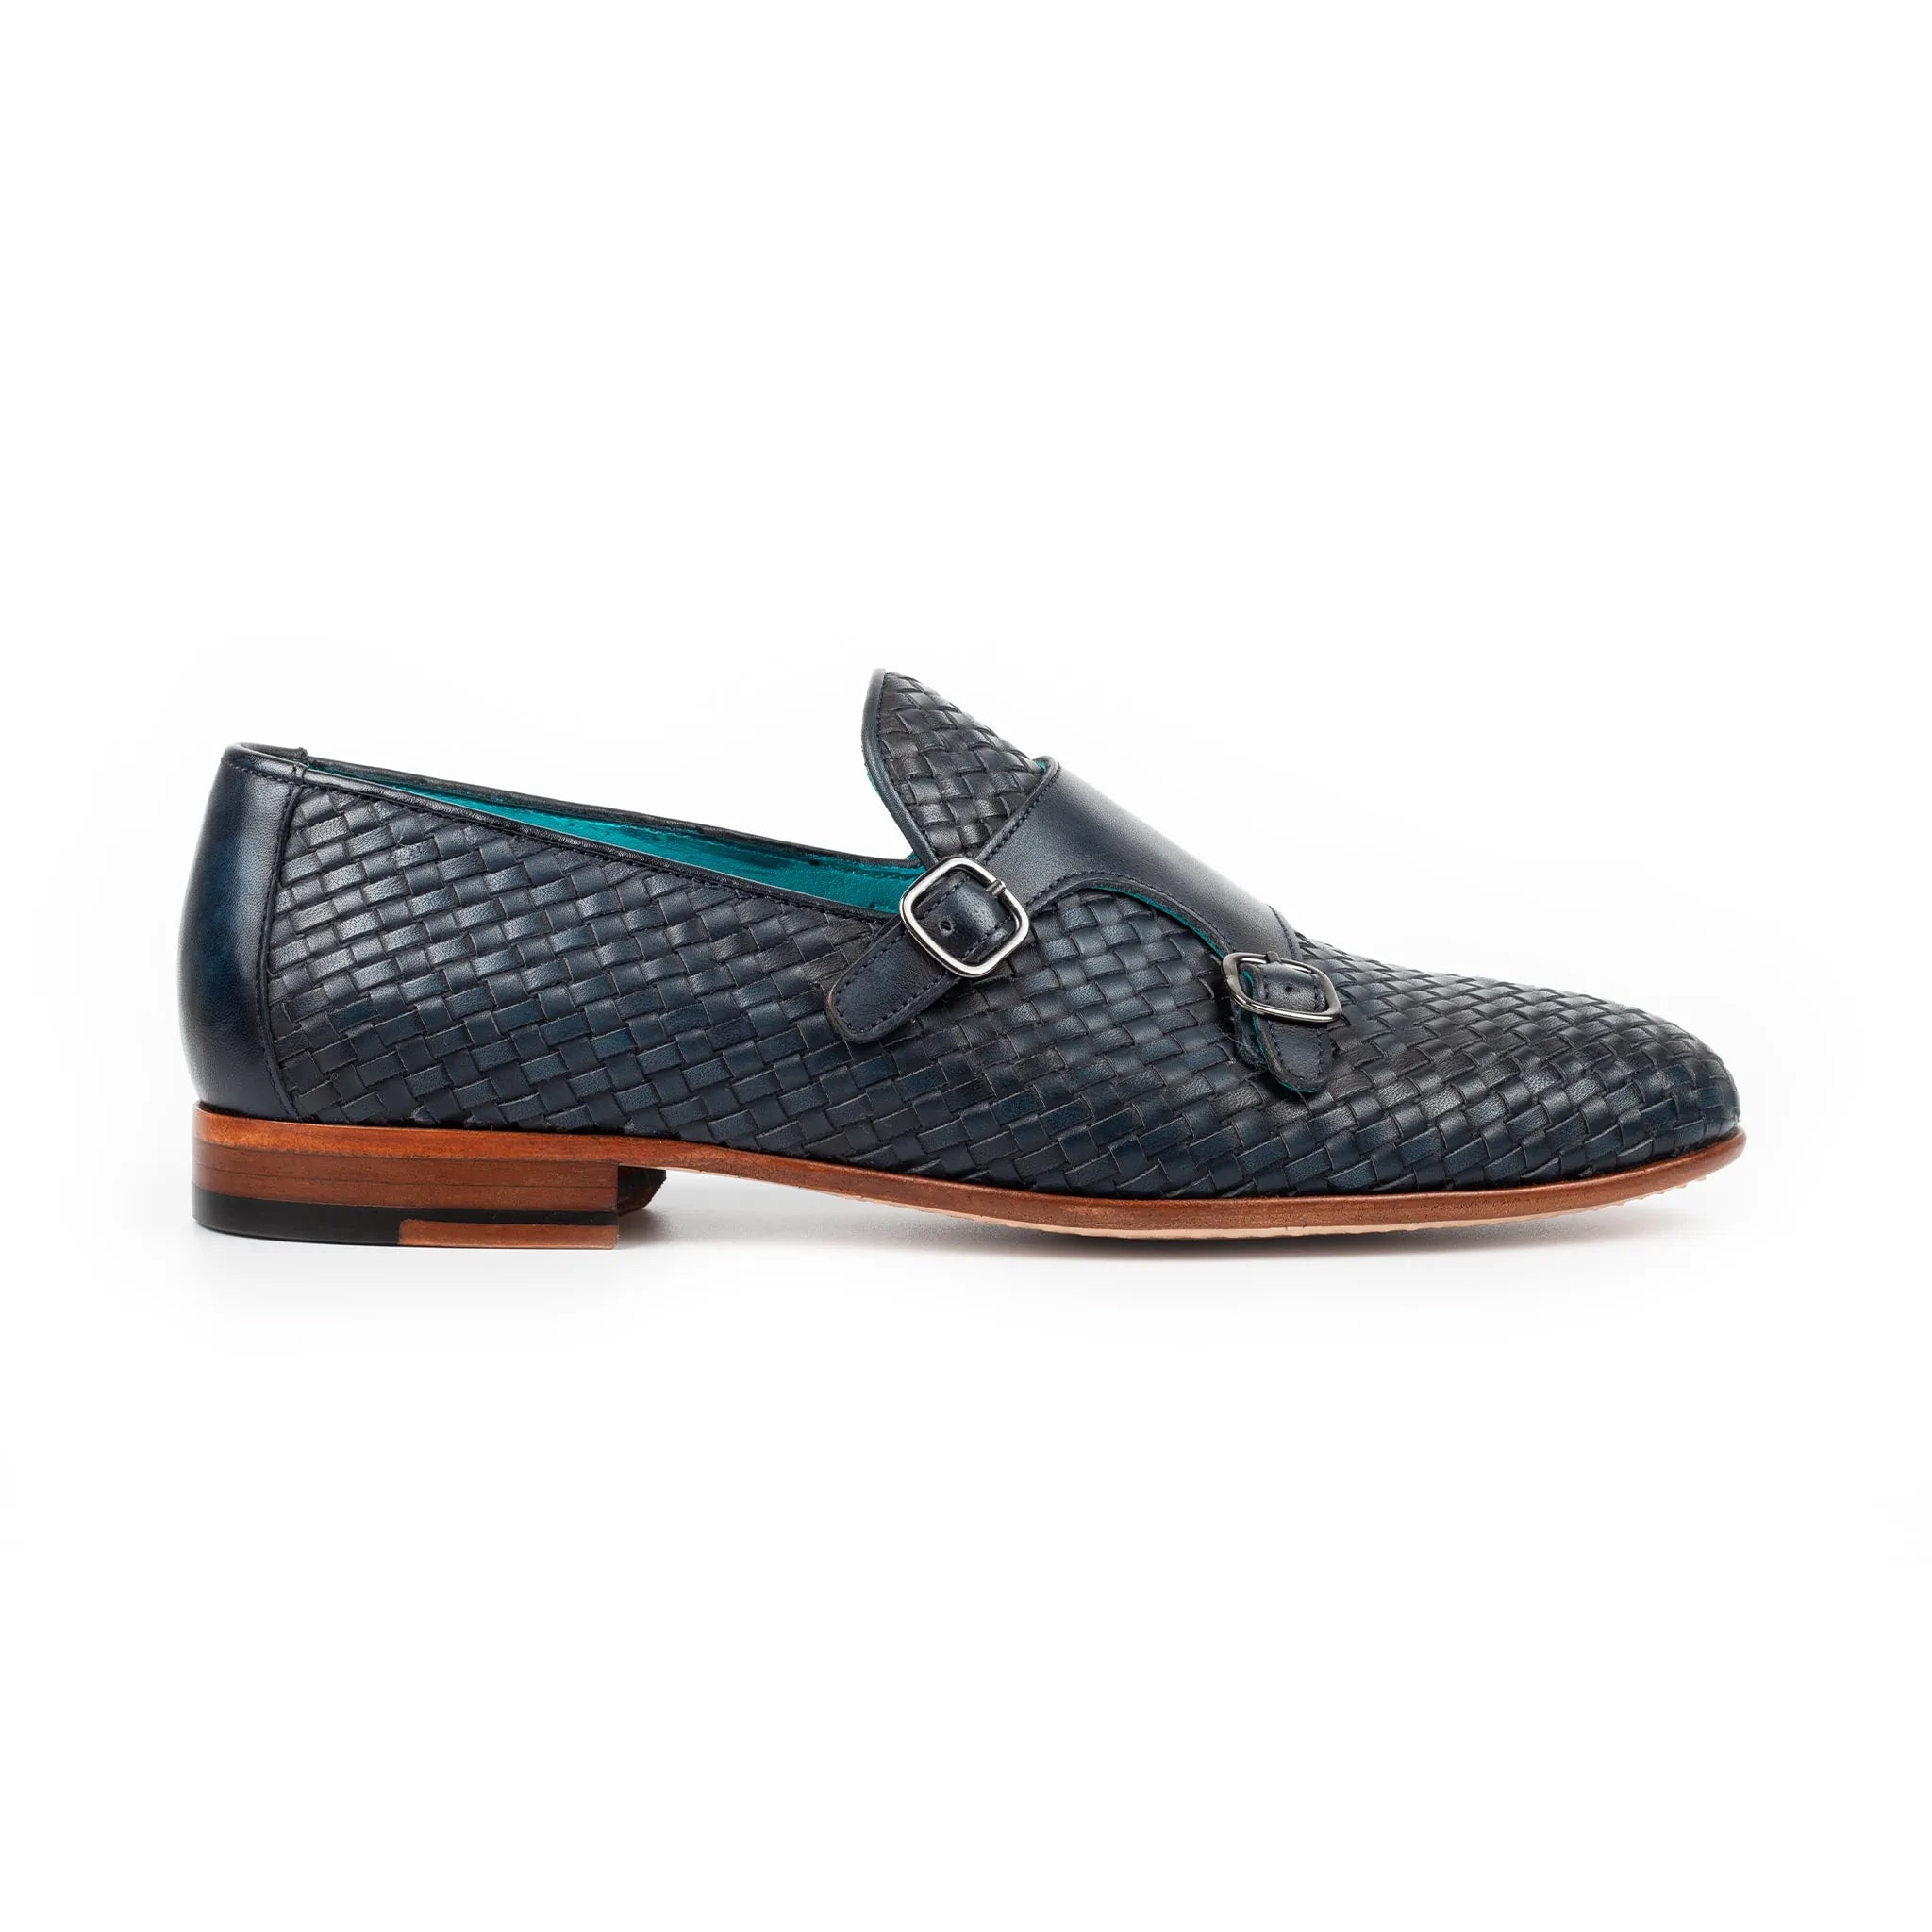 Navy Handcrafted Double Monk Strap Men's Shoes